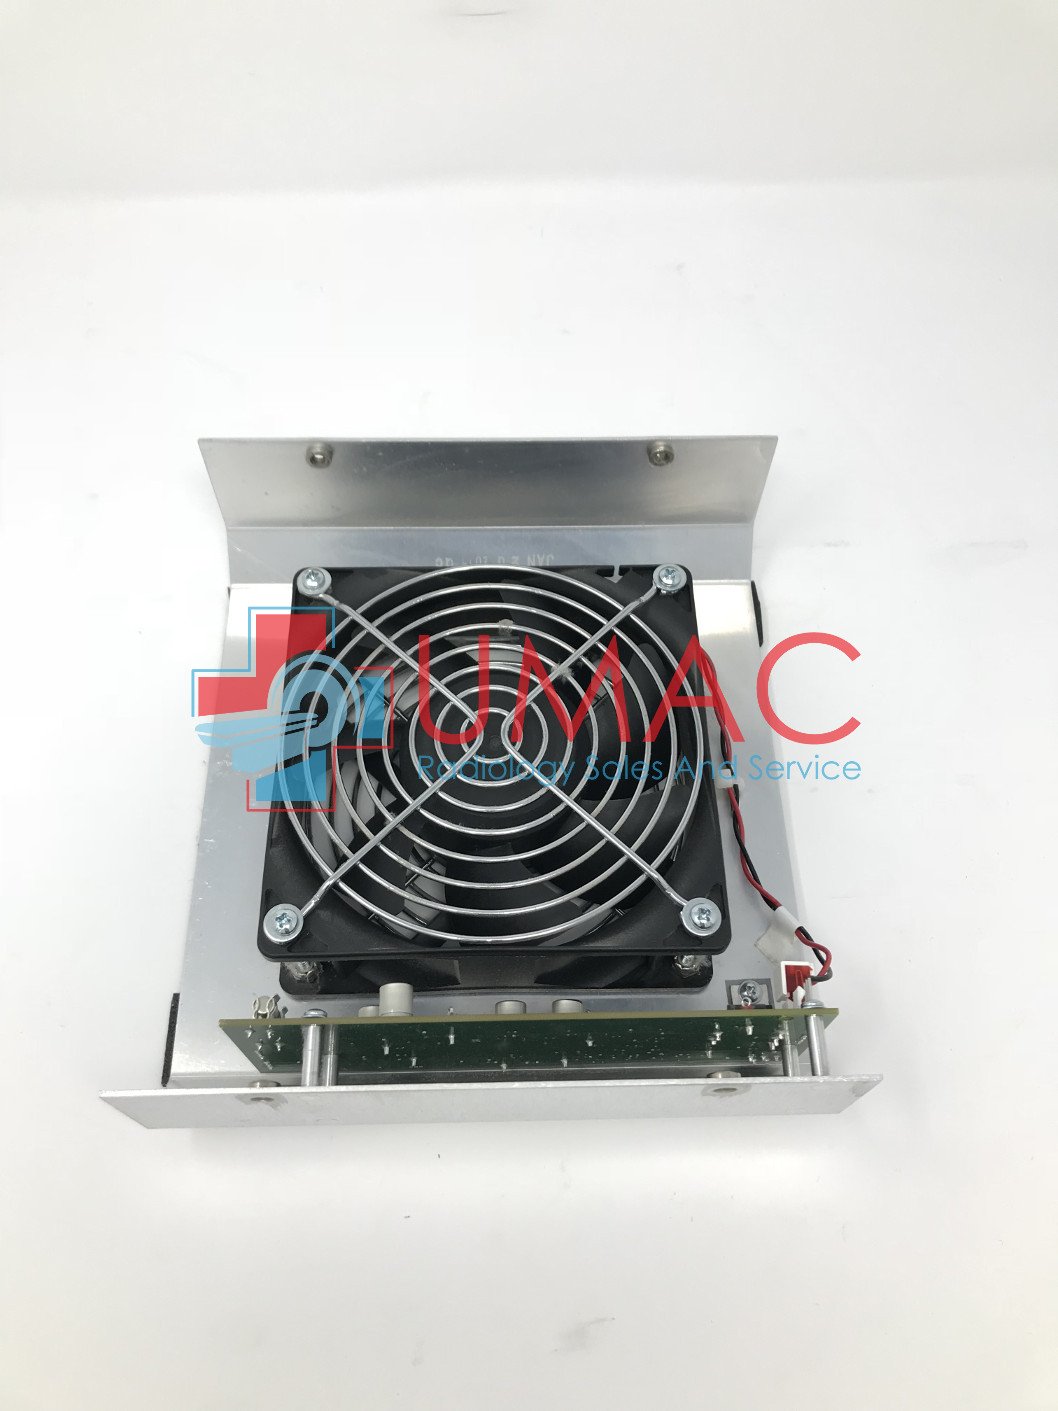 Hologic Dimensions Mammography PCB-00177 Fan Assembly